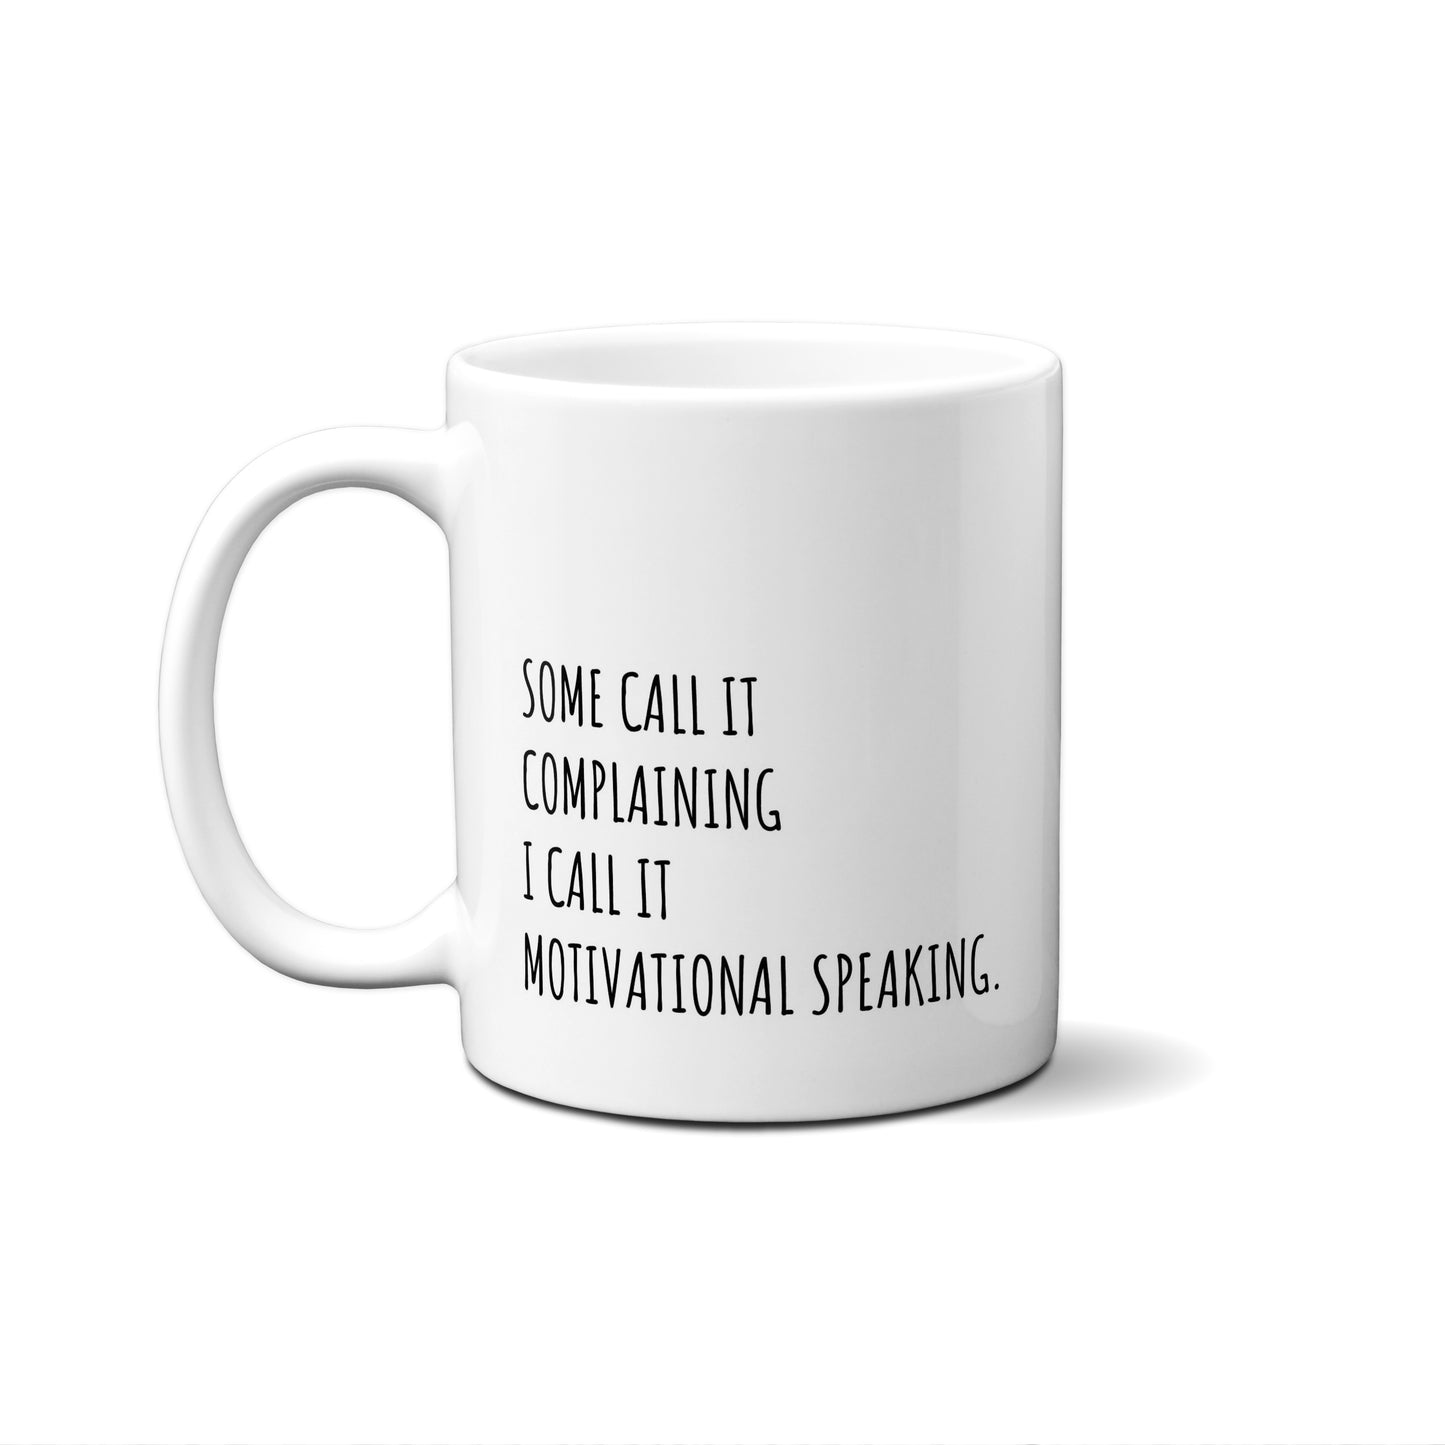 Some Call It Complaining I Call It Motivational Speaking. Quote Mug